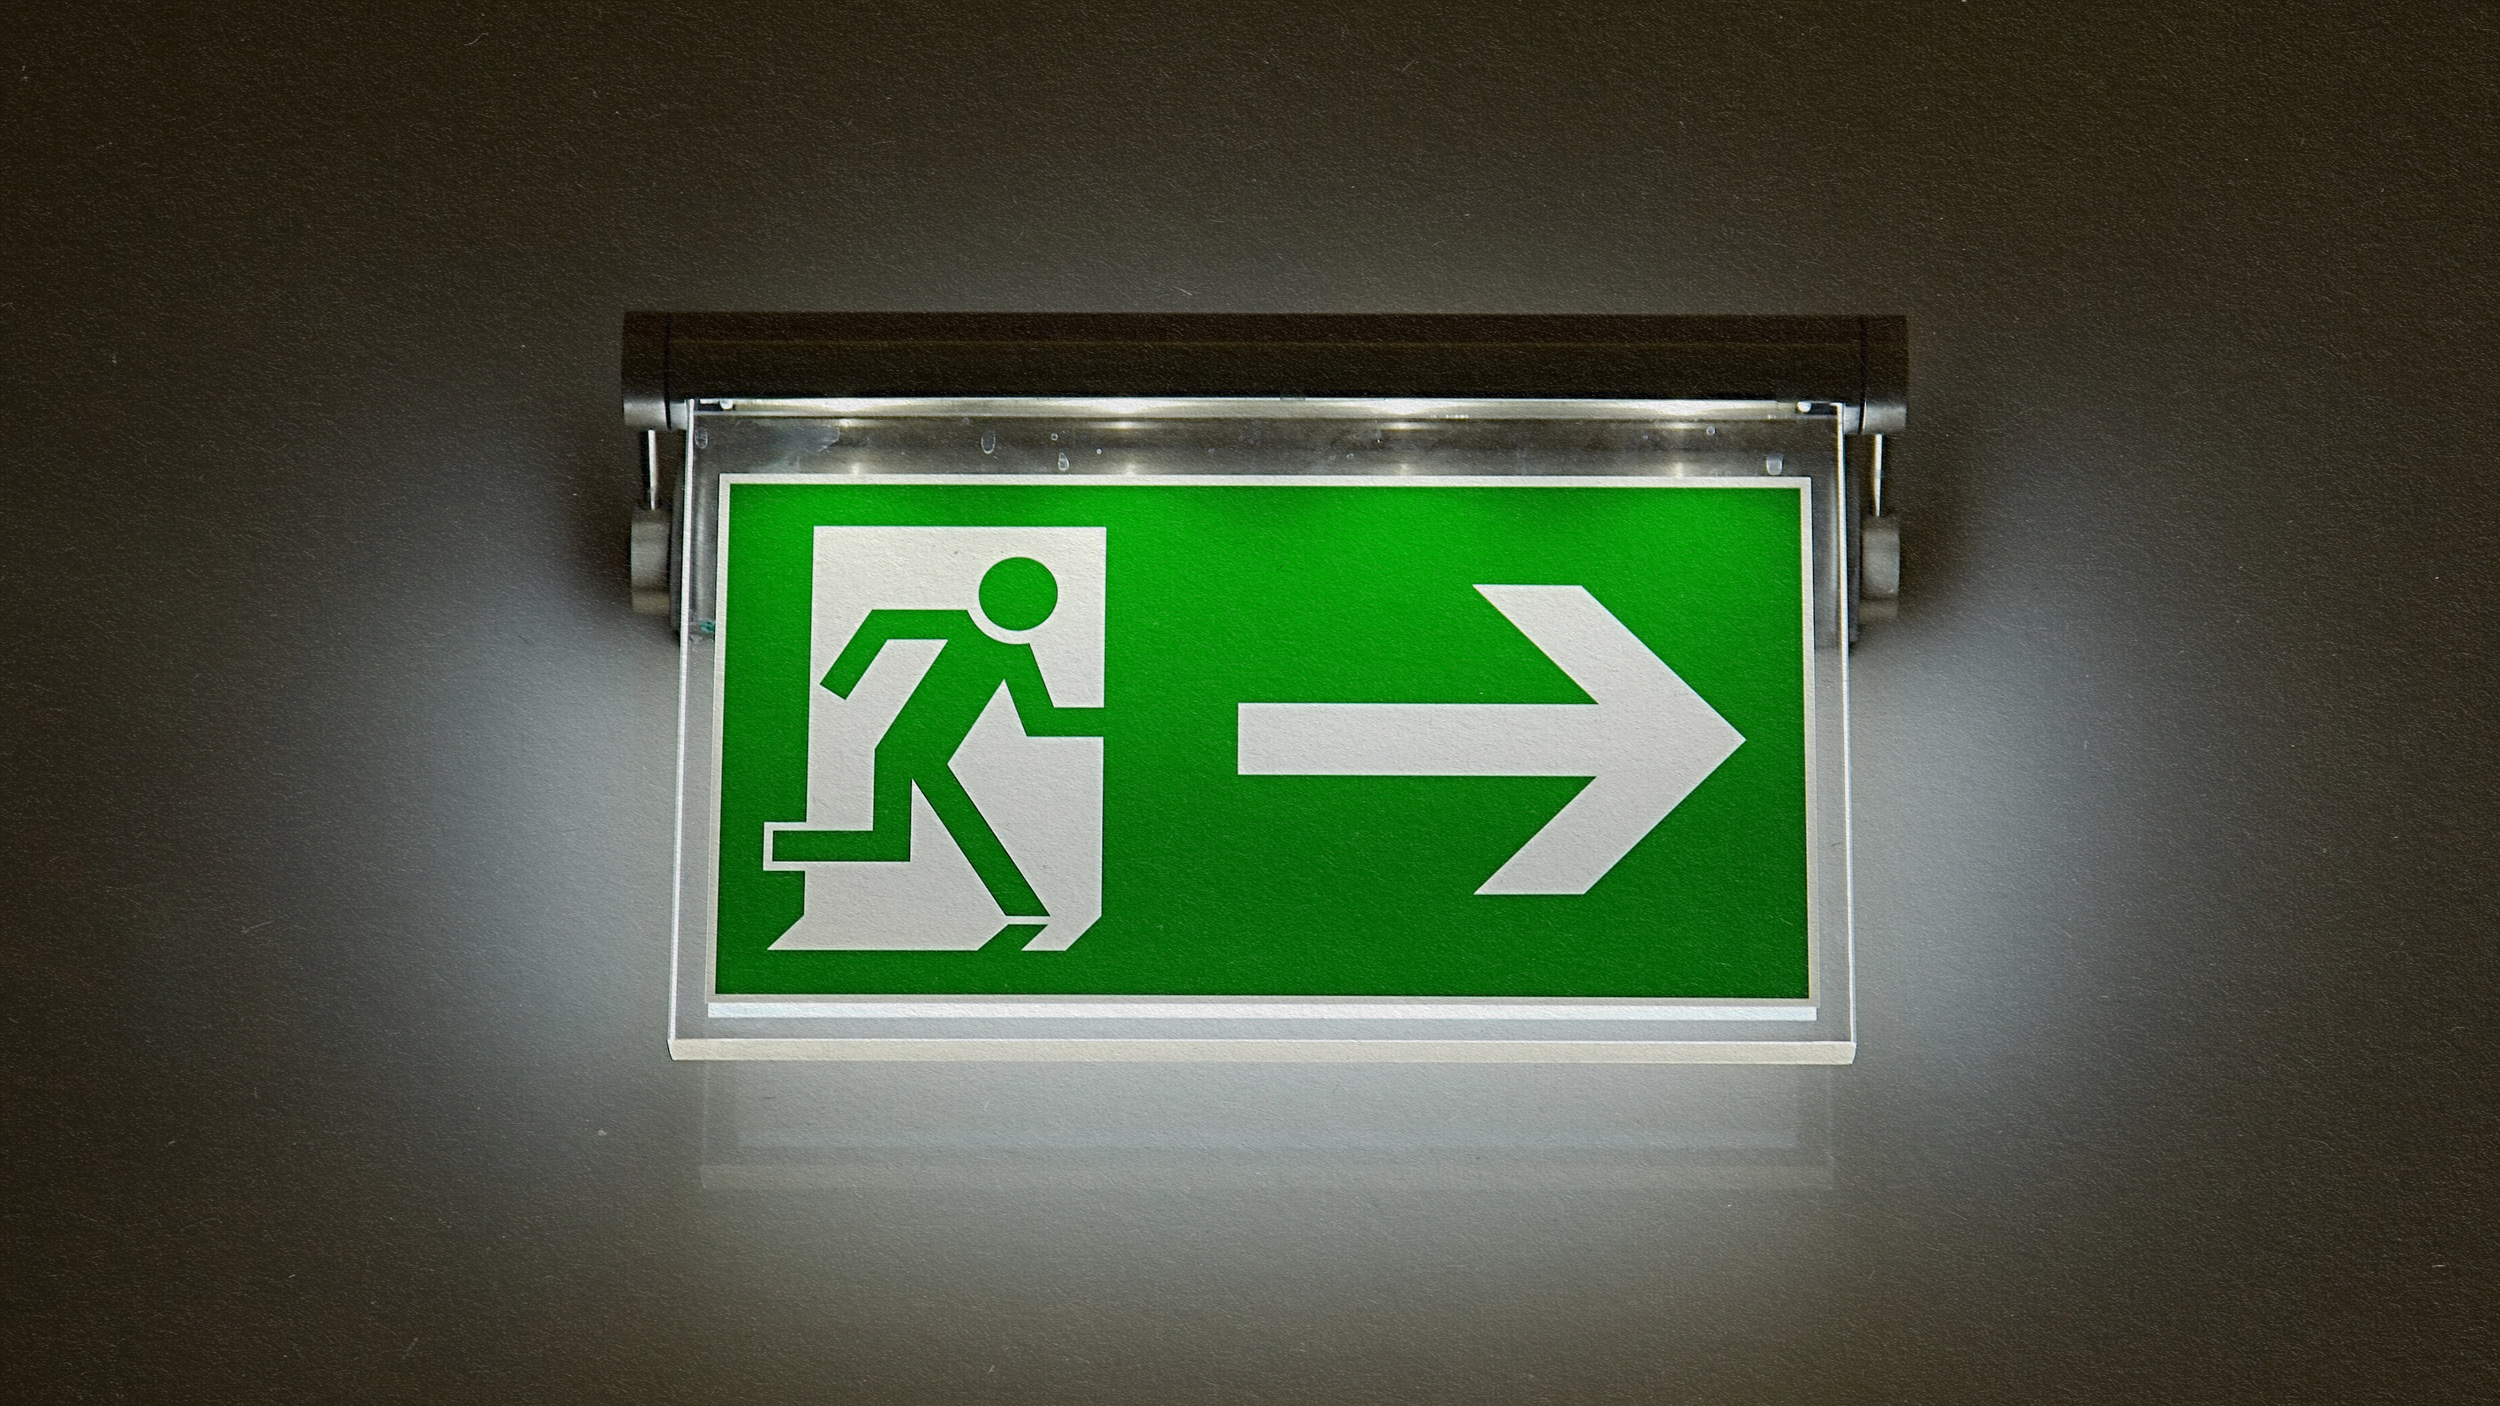 A green exit sign displaying a directional arrow.